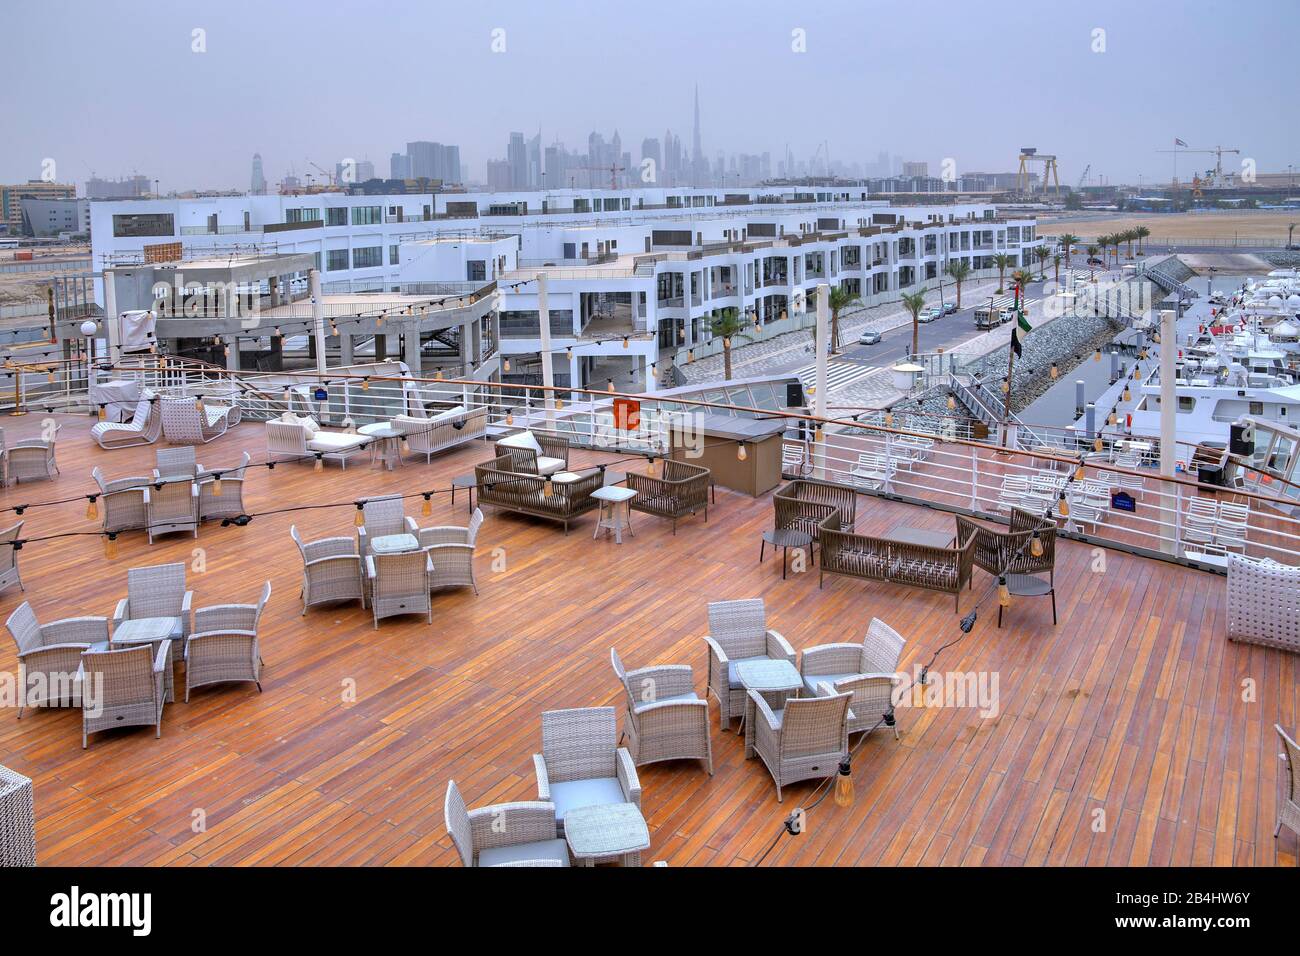 Exterior deck on the hotel and museum ship Queen Elizabeth 2 (QE2) with apartment buildings and city skyline, Dubai, Persian Gulf, United Arab Emirates Stock Photo